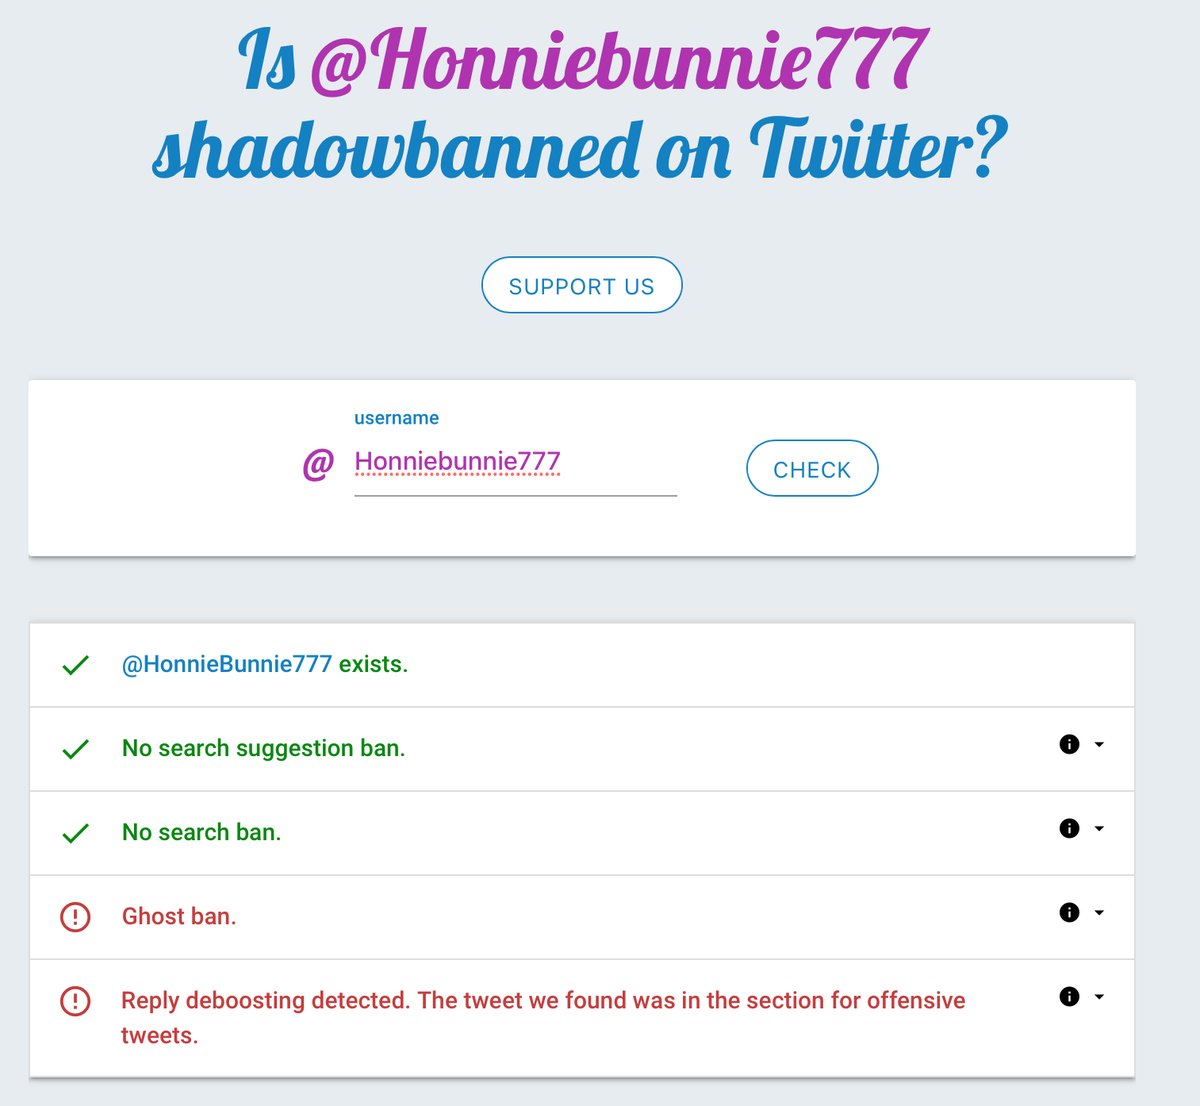 It's ok, Mr. @elonmusk. I've been shadow banned, too. You're in good company! 🙏 #ShadowBanned #DoubleBanned #TwitterBan #GhostBanned